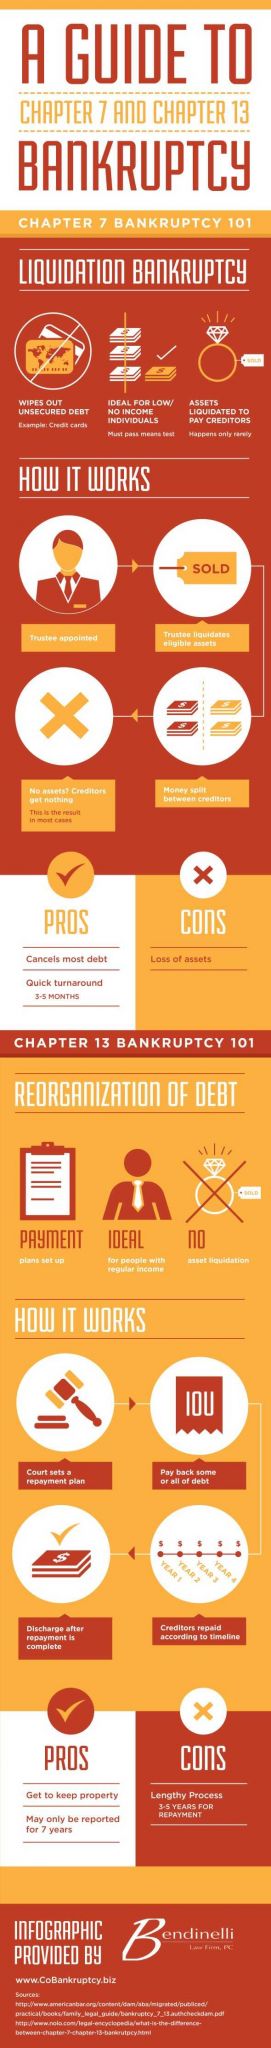 Chapter 7 Federal Income Tax Worksheet Answers together with 18 Best Bankruptcy Images by Mark Hyder On Pinterest